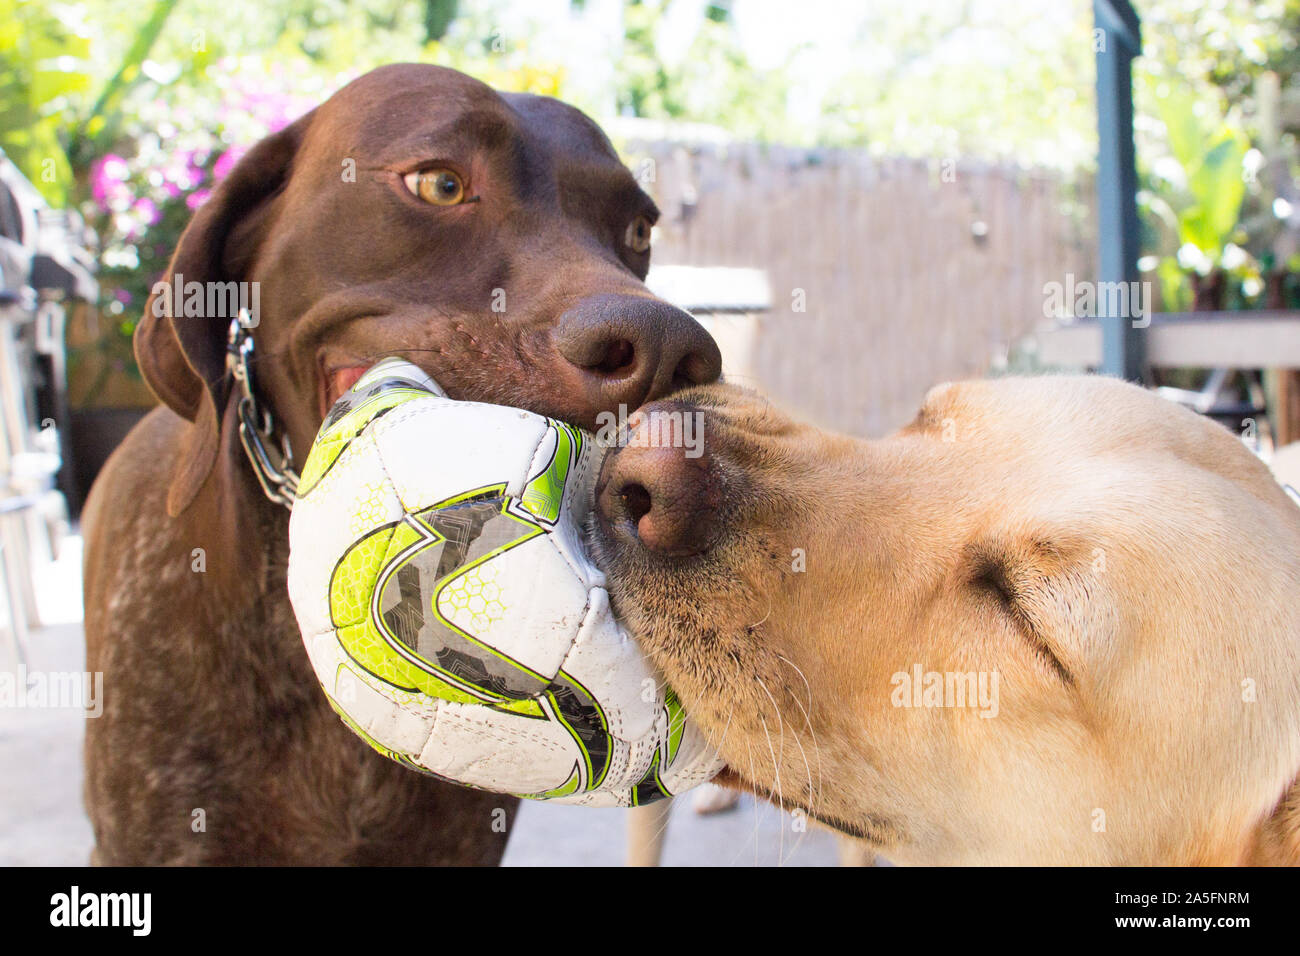 Two dogs biting a football, Fort de Soto, Florida, United States Stock Photo